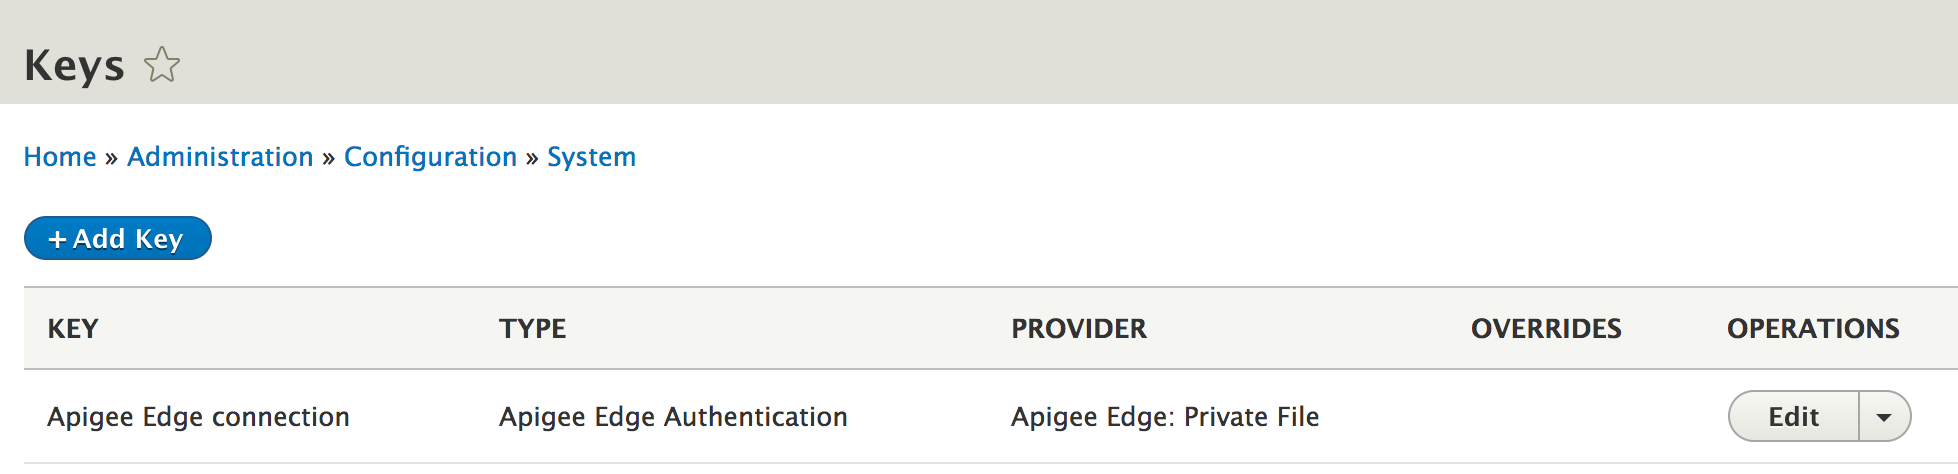 View message data with the Debug view, Apigee